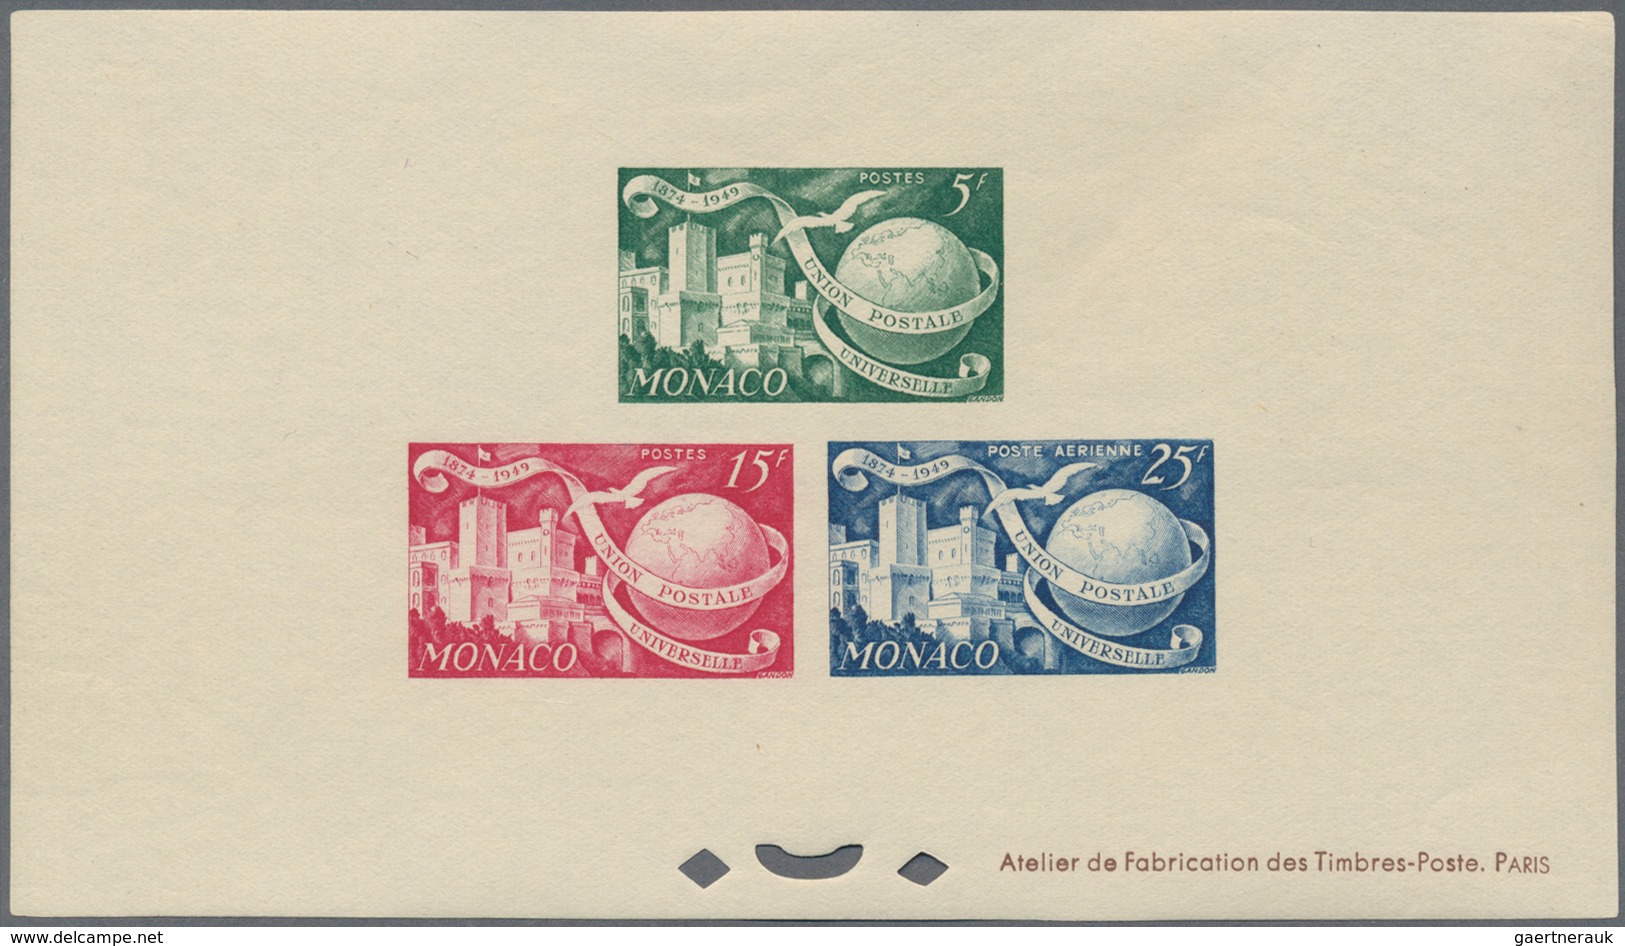 Monaco: 1949, 75 years UPU lot of MNH epreuve d'artiste imperforated and perfortated: 5f., 15f. and